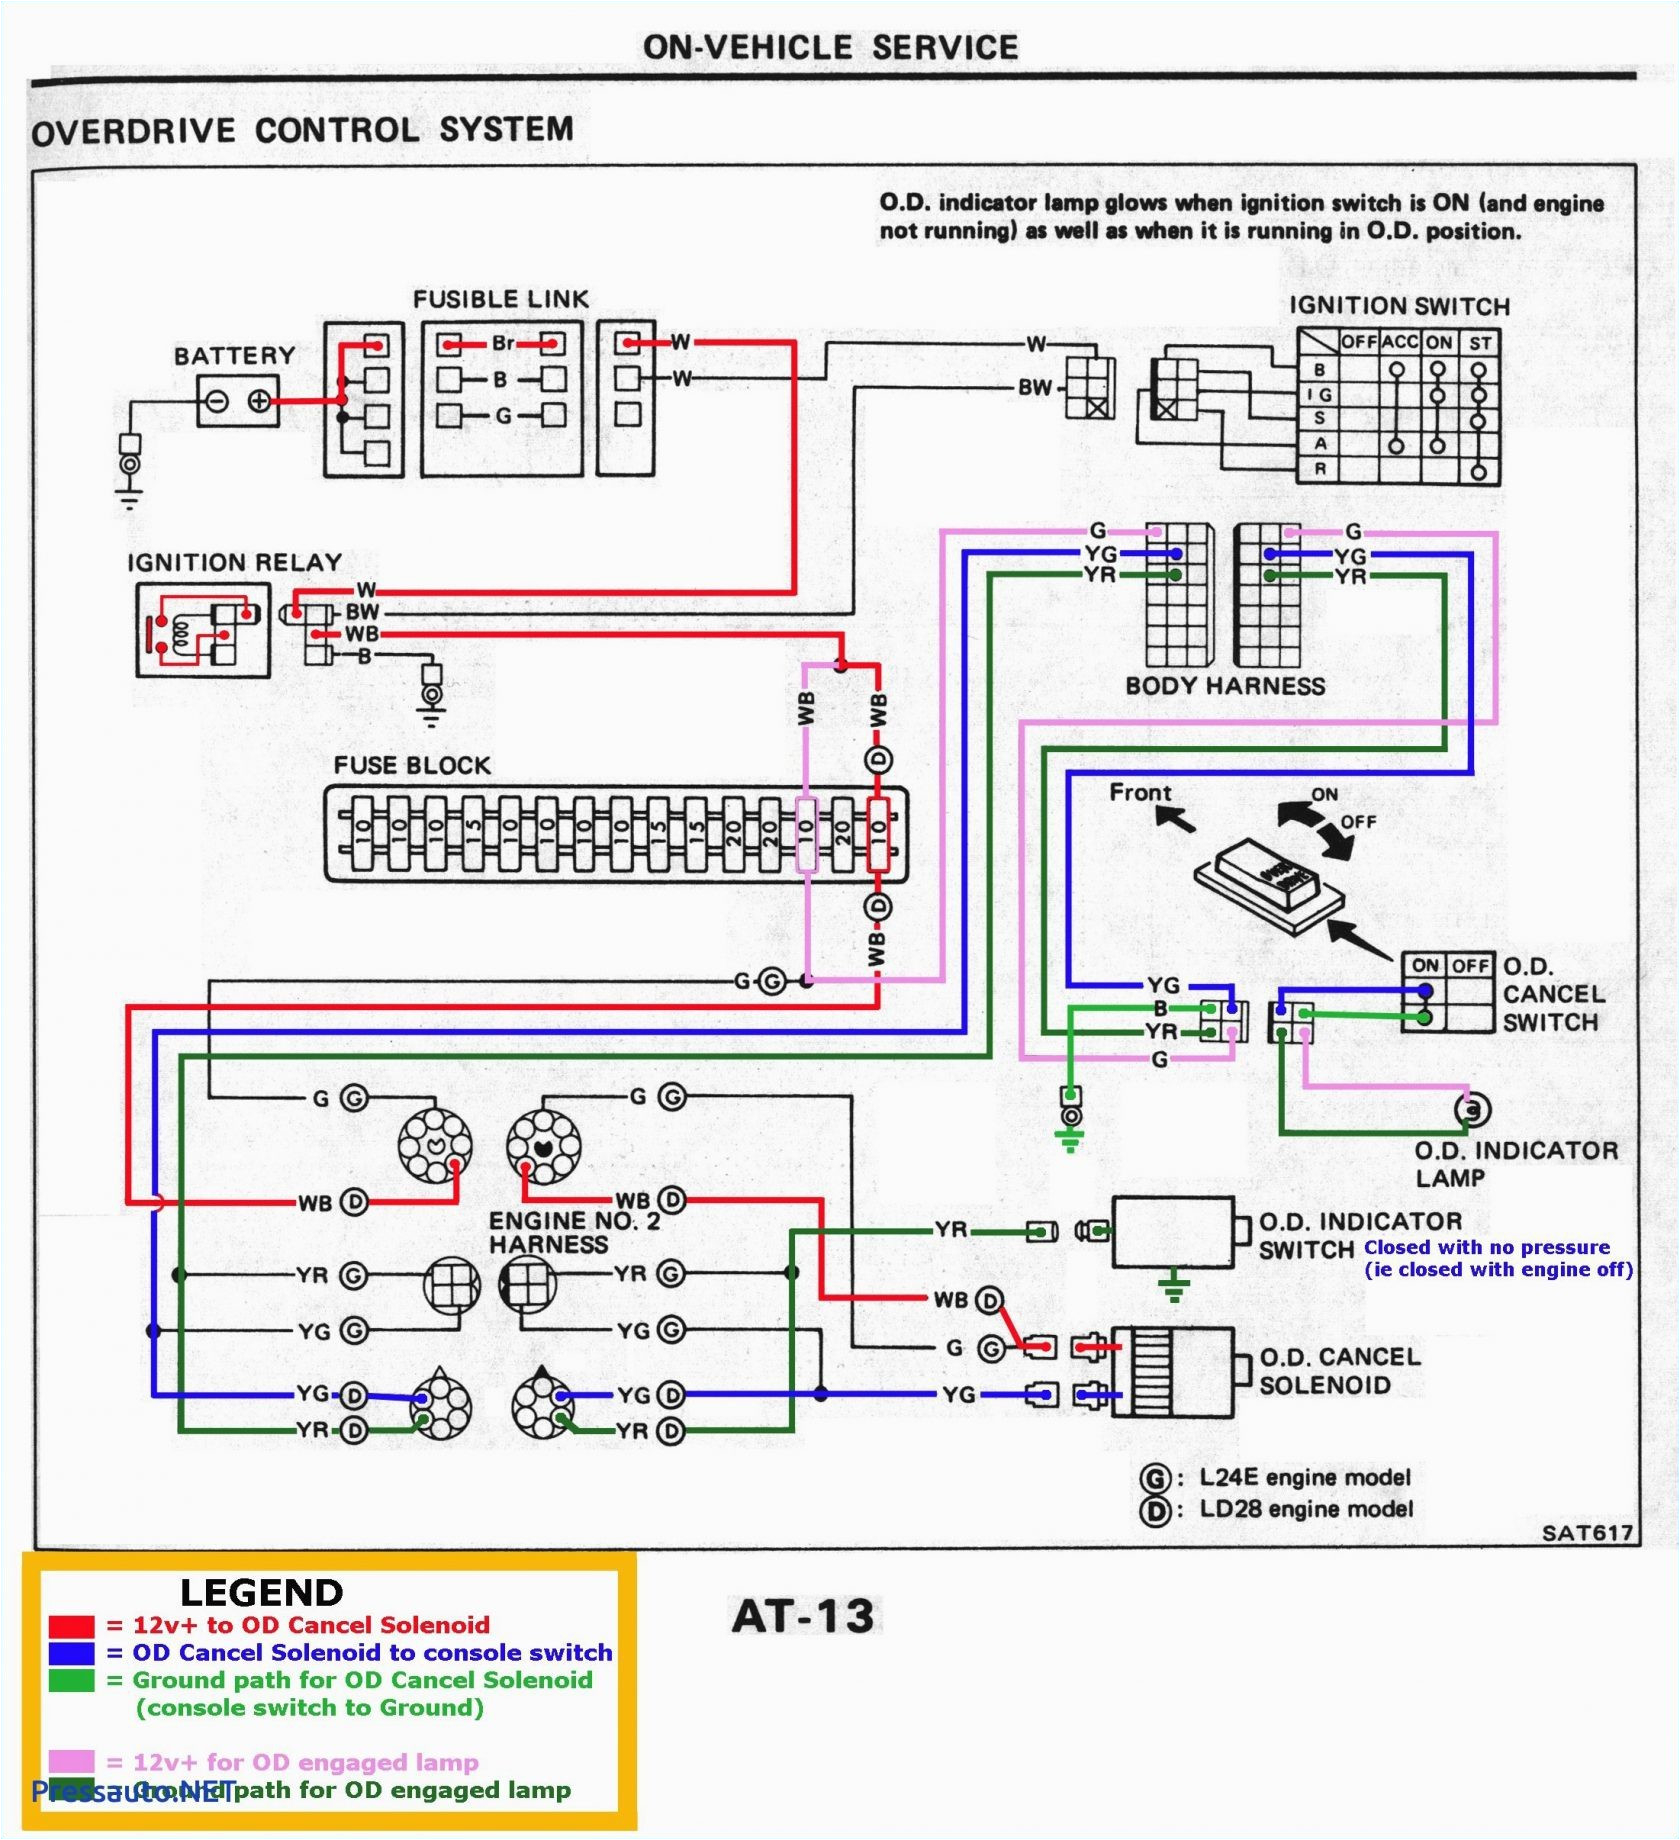 diagram harness wire engine 6709894 wiring diagrams show circuit diagram wire engine schematic